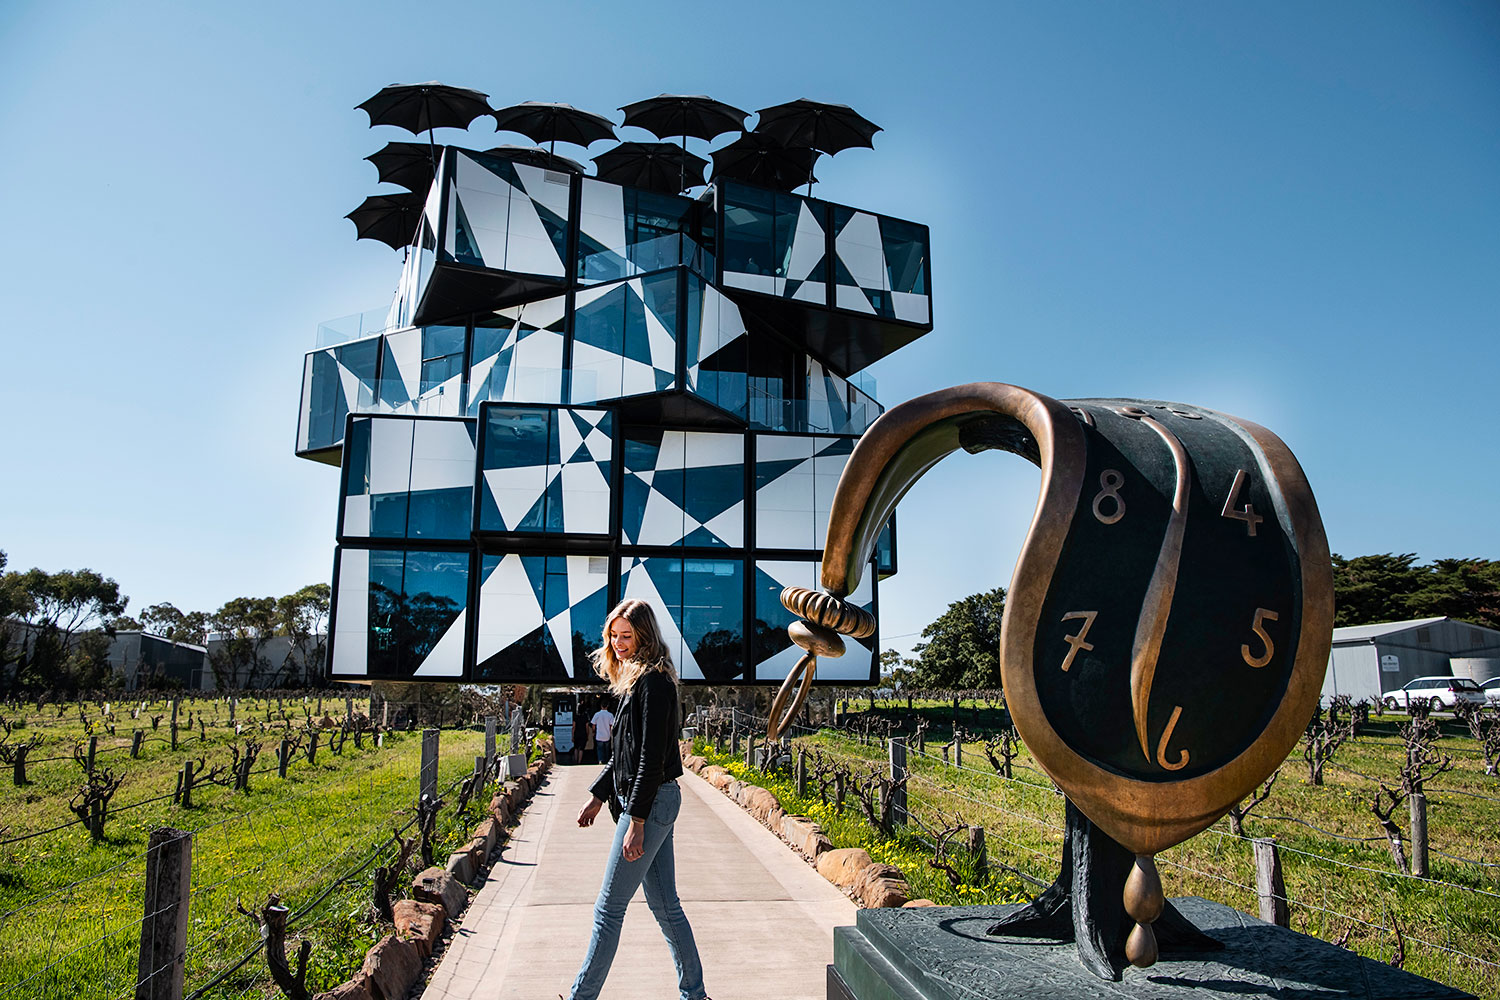 Step inside the d'Arenberg Cube with chief winemaker and innovator, Chester Osborn, who pairs wine and art.